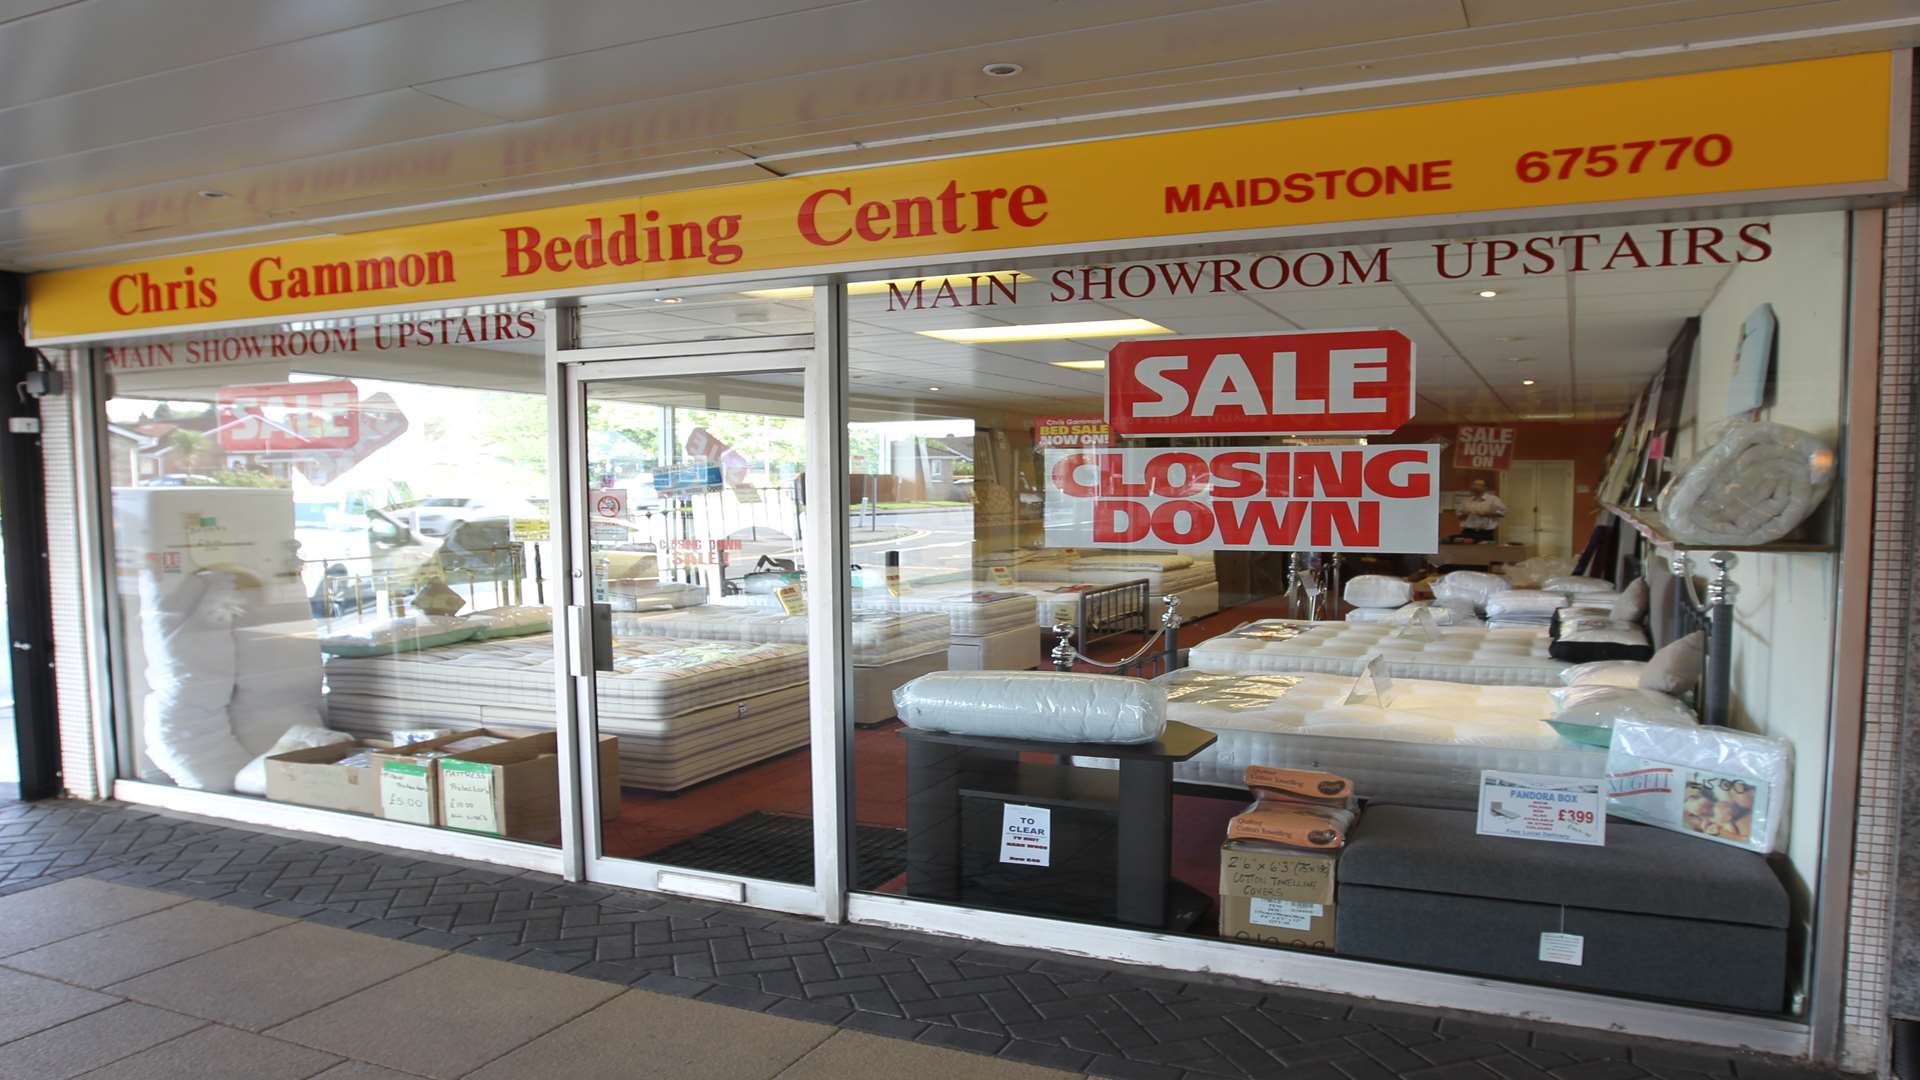 Chris Gammon Bed Centre at The Mid Kent Shopping Centre closing down. Picture: John Westhrop FM4016612